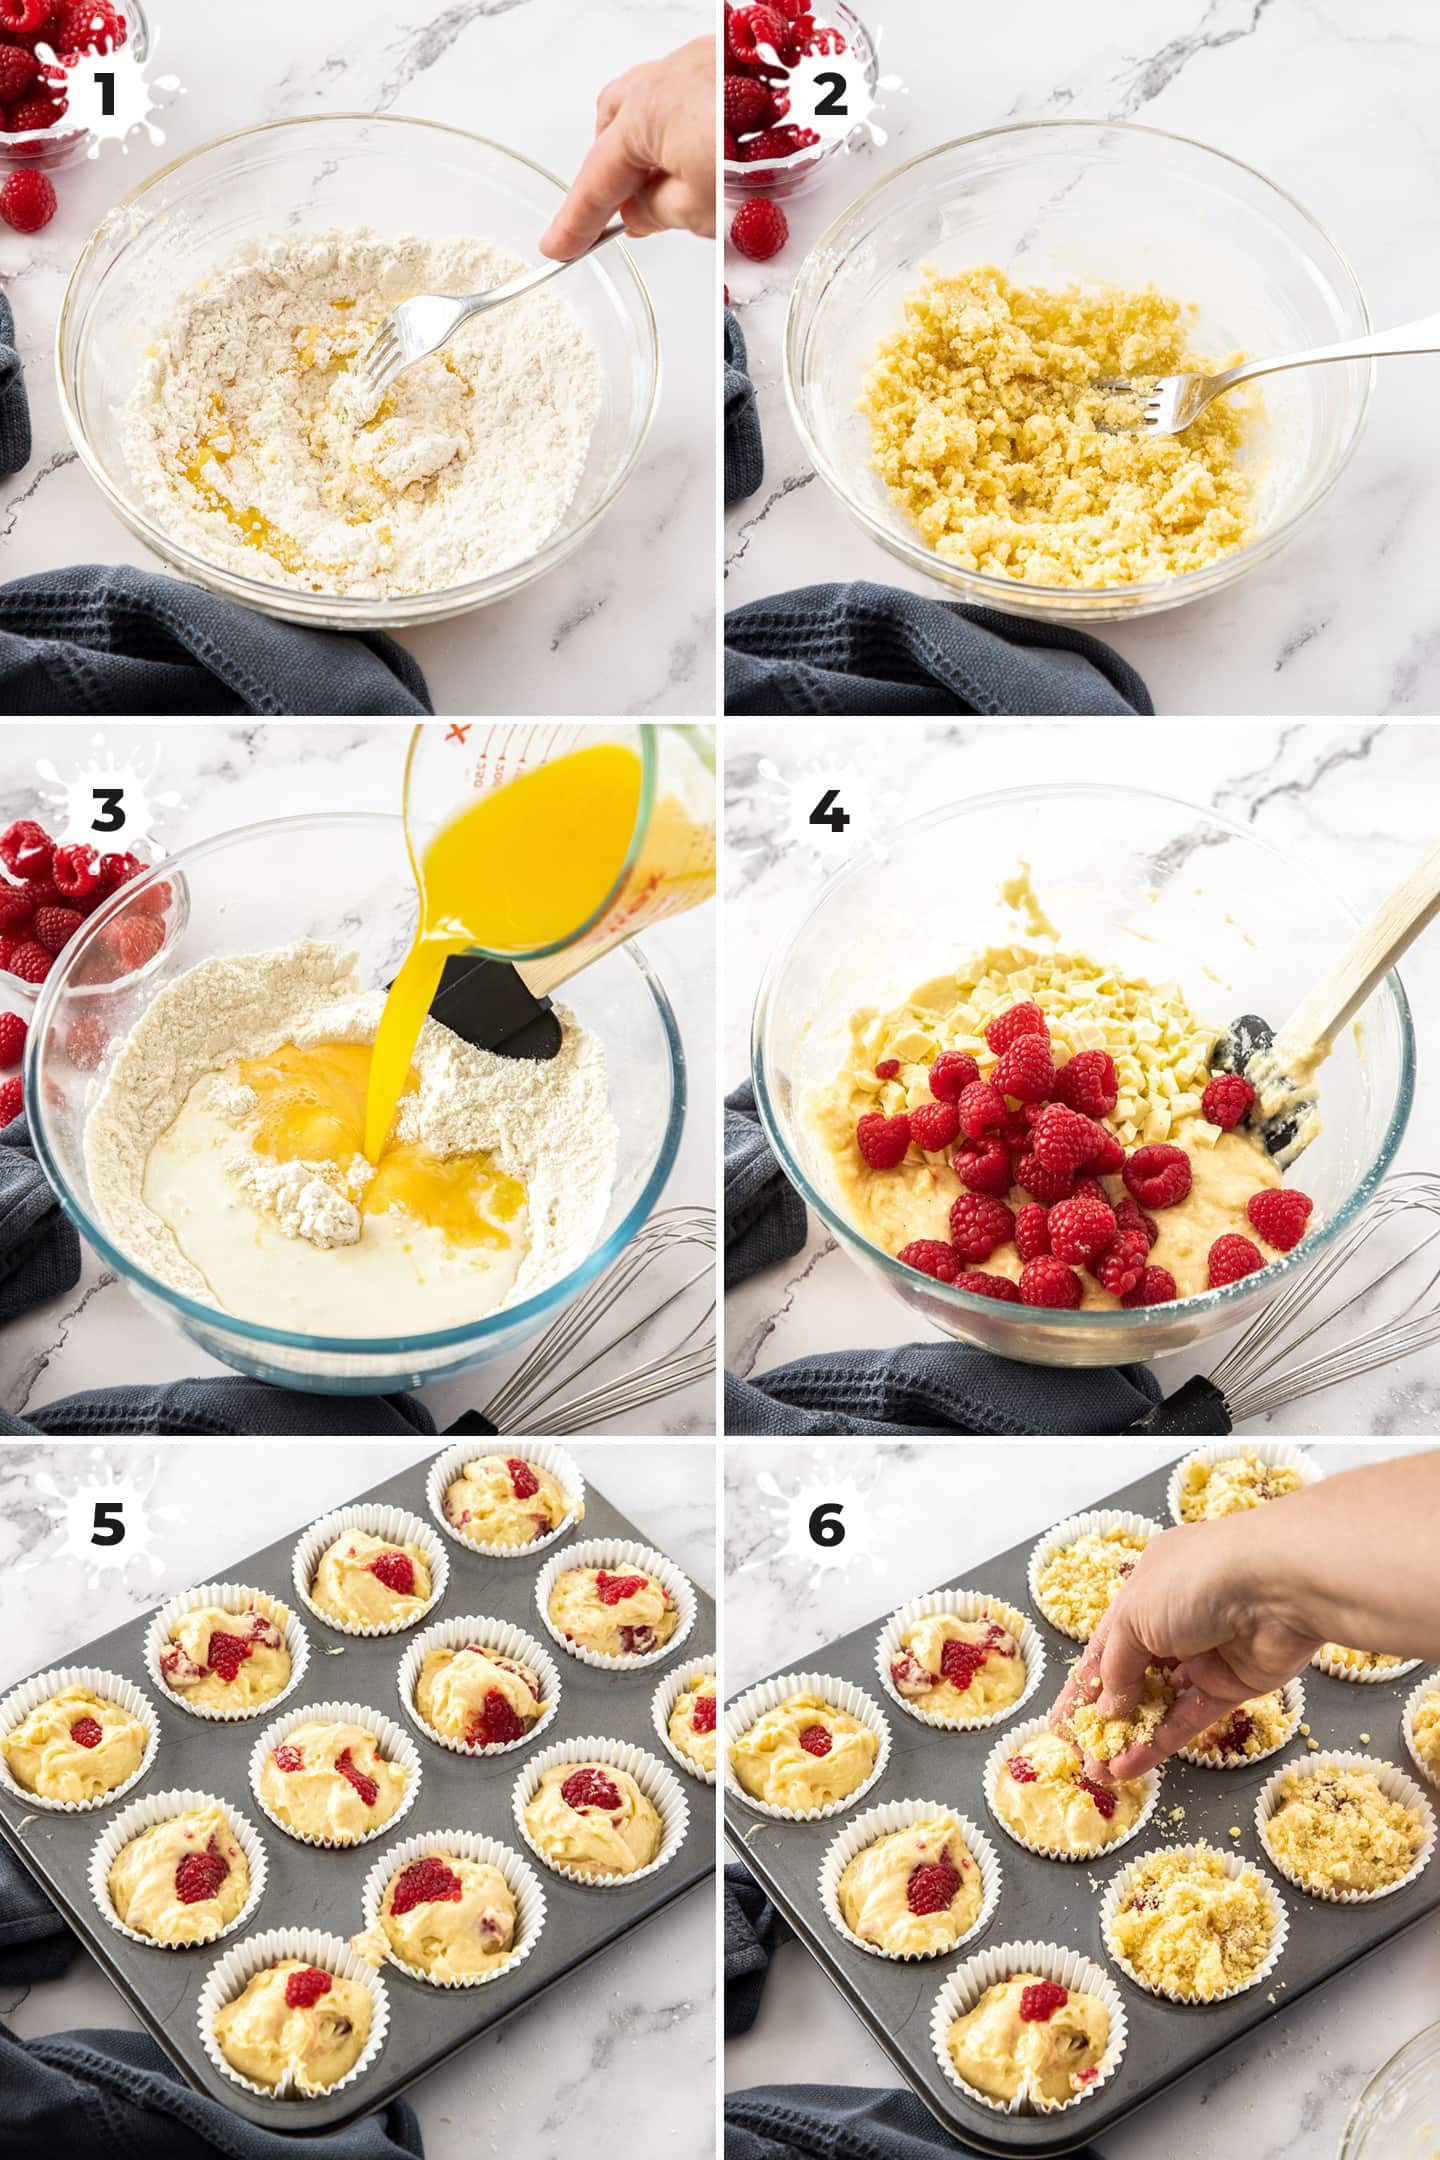 6 images showing how to make raspberry white chocolate muffins.